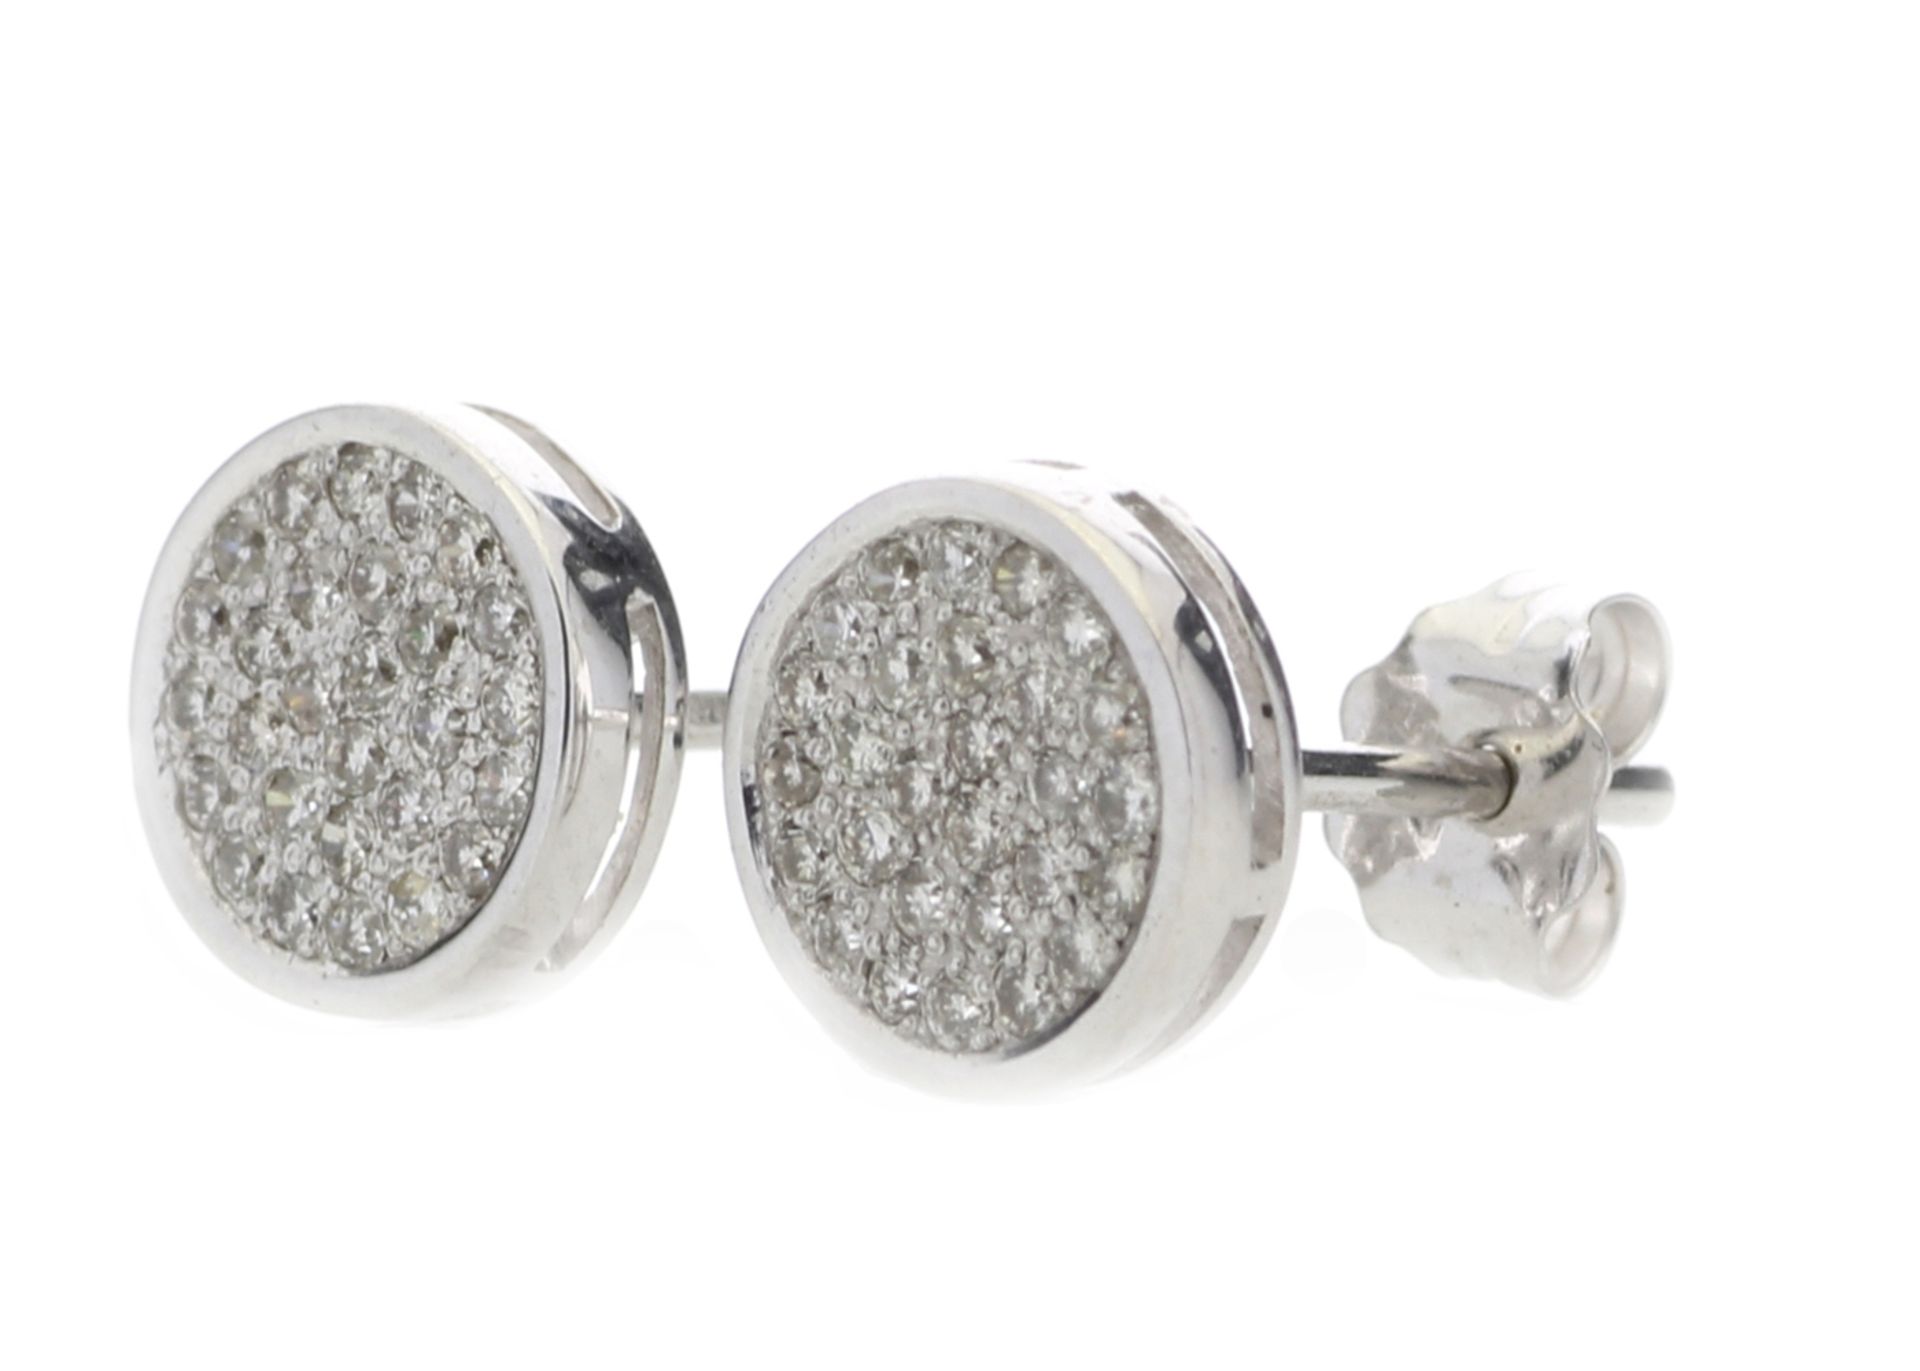 9ct White Gold Diamond Cluster Earring 0.28 Carats - Image 2 of 4